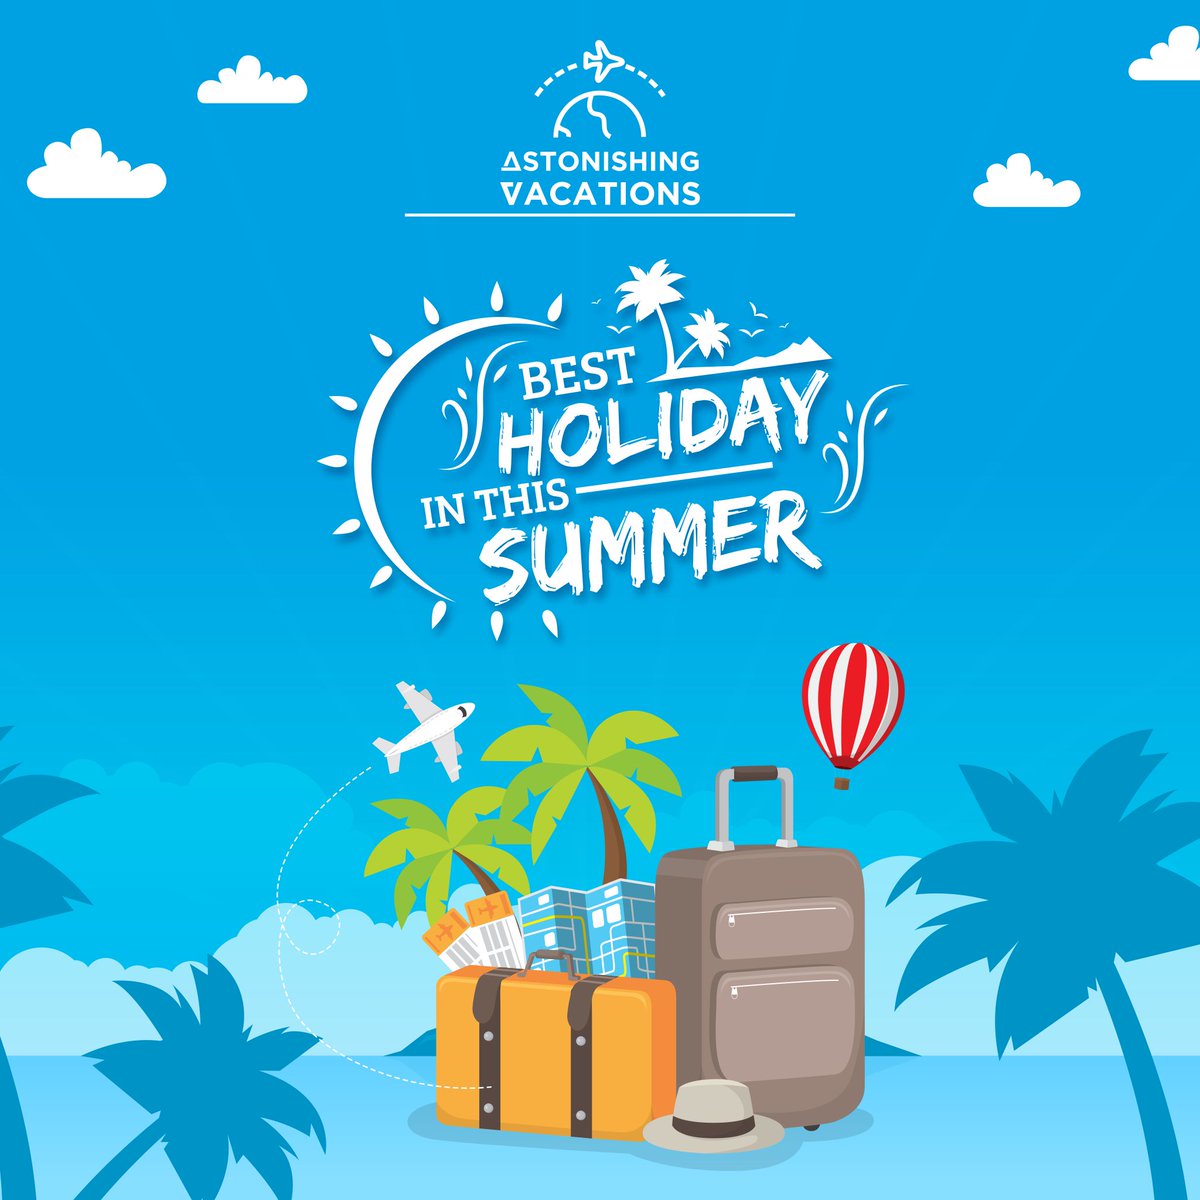 BEST HOLIDAY IN THIS SUMMER.
.
.
BOOK NOW:
astonishingvacations.in
.
.
#holidayplanning #holidayplan #holidayplanner #holidayplans #holidayplanters #holidayplants #holidayplanningtime #holidayplanners #holidayplanet #holidayplannerclips #holidayplant #holidayplandmc